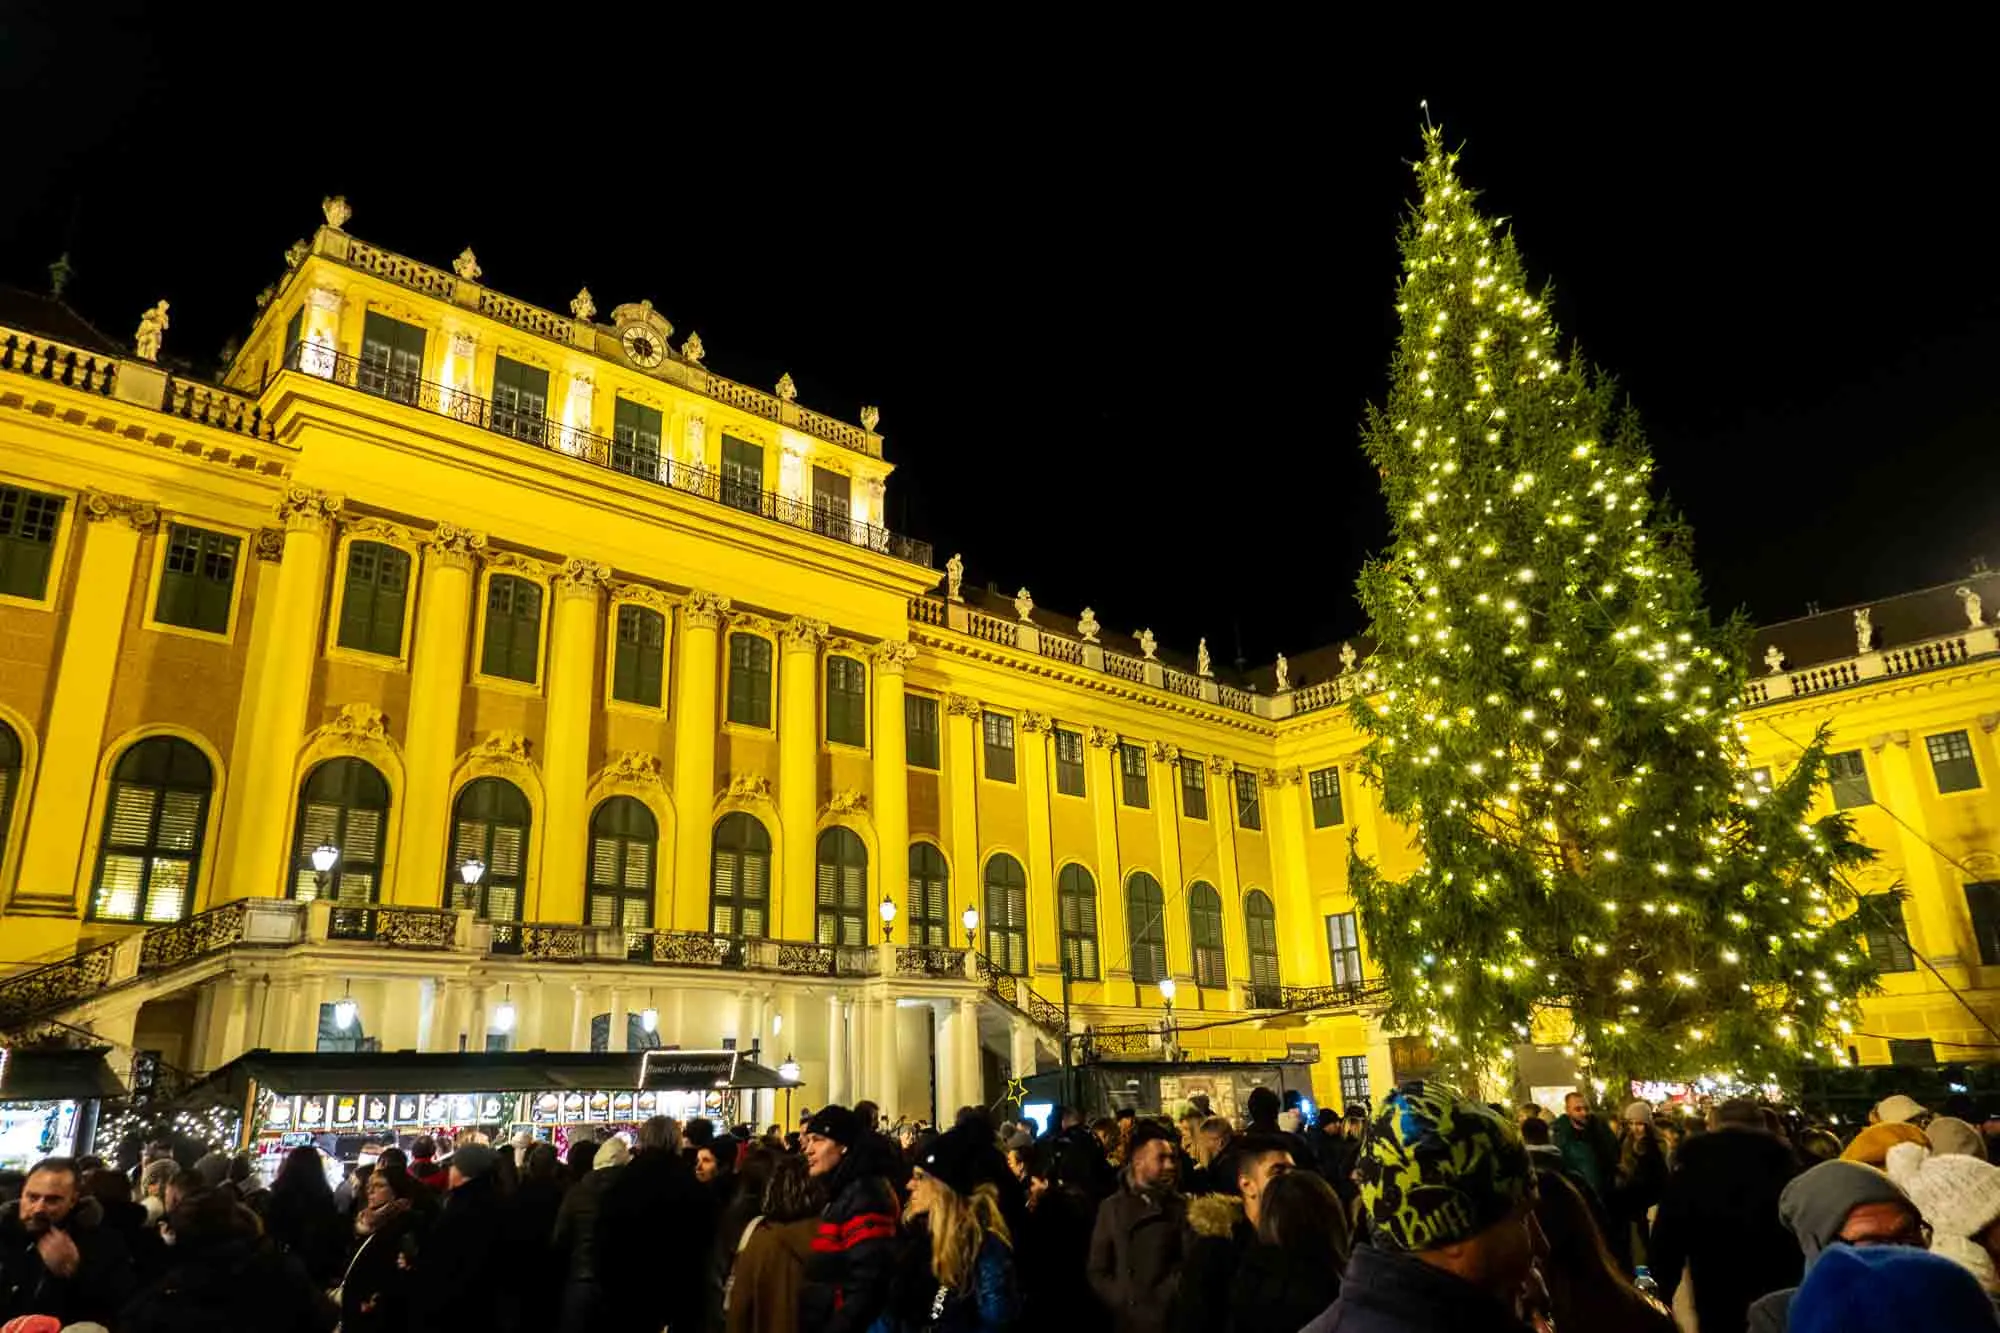 People milling around a Christmas tree in front of a large yellow building.